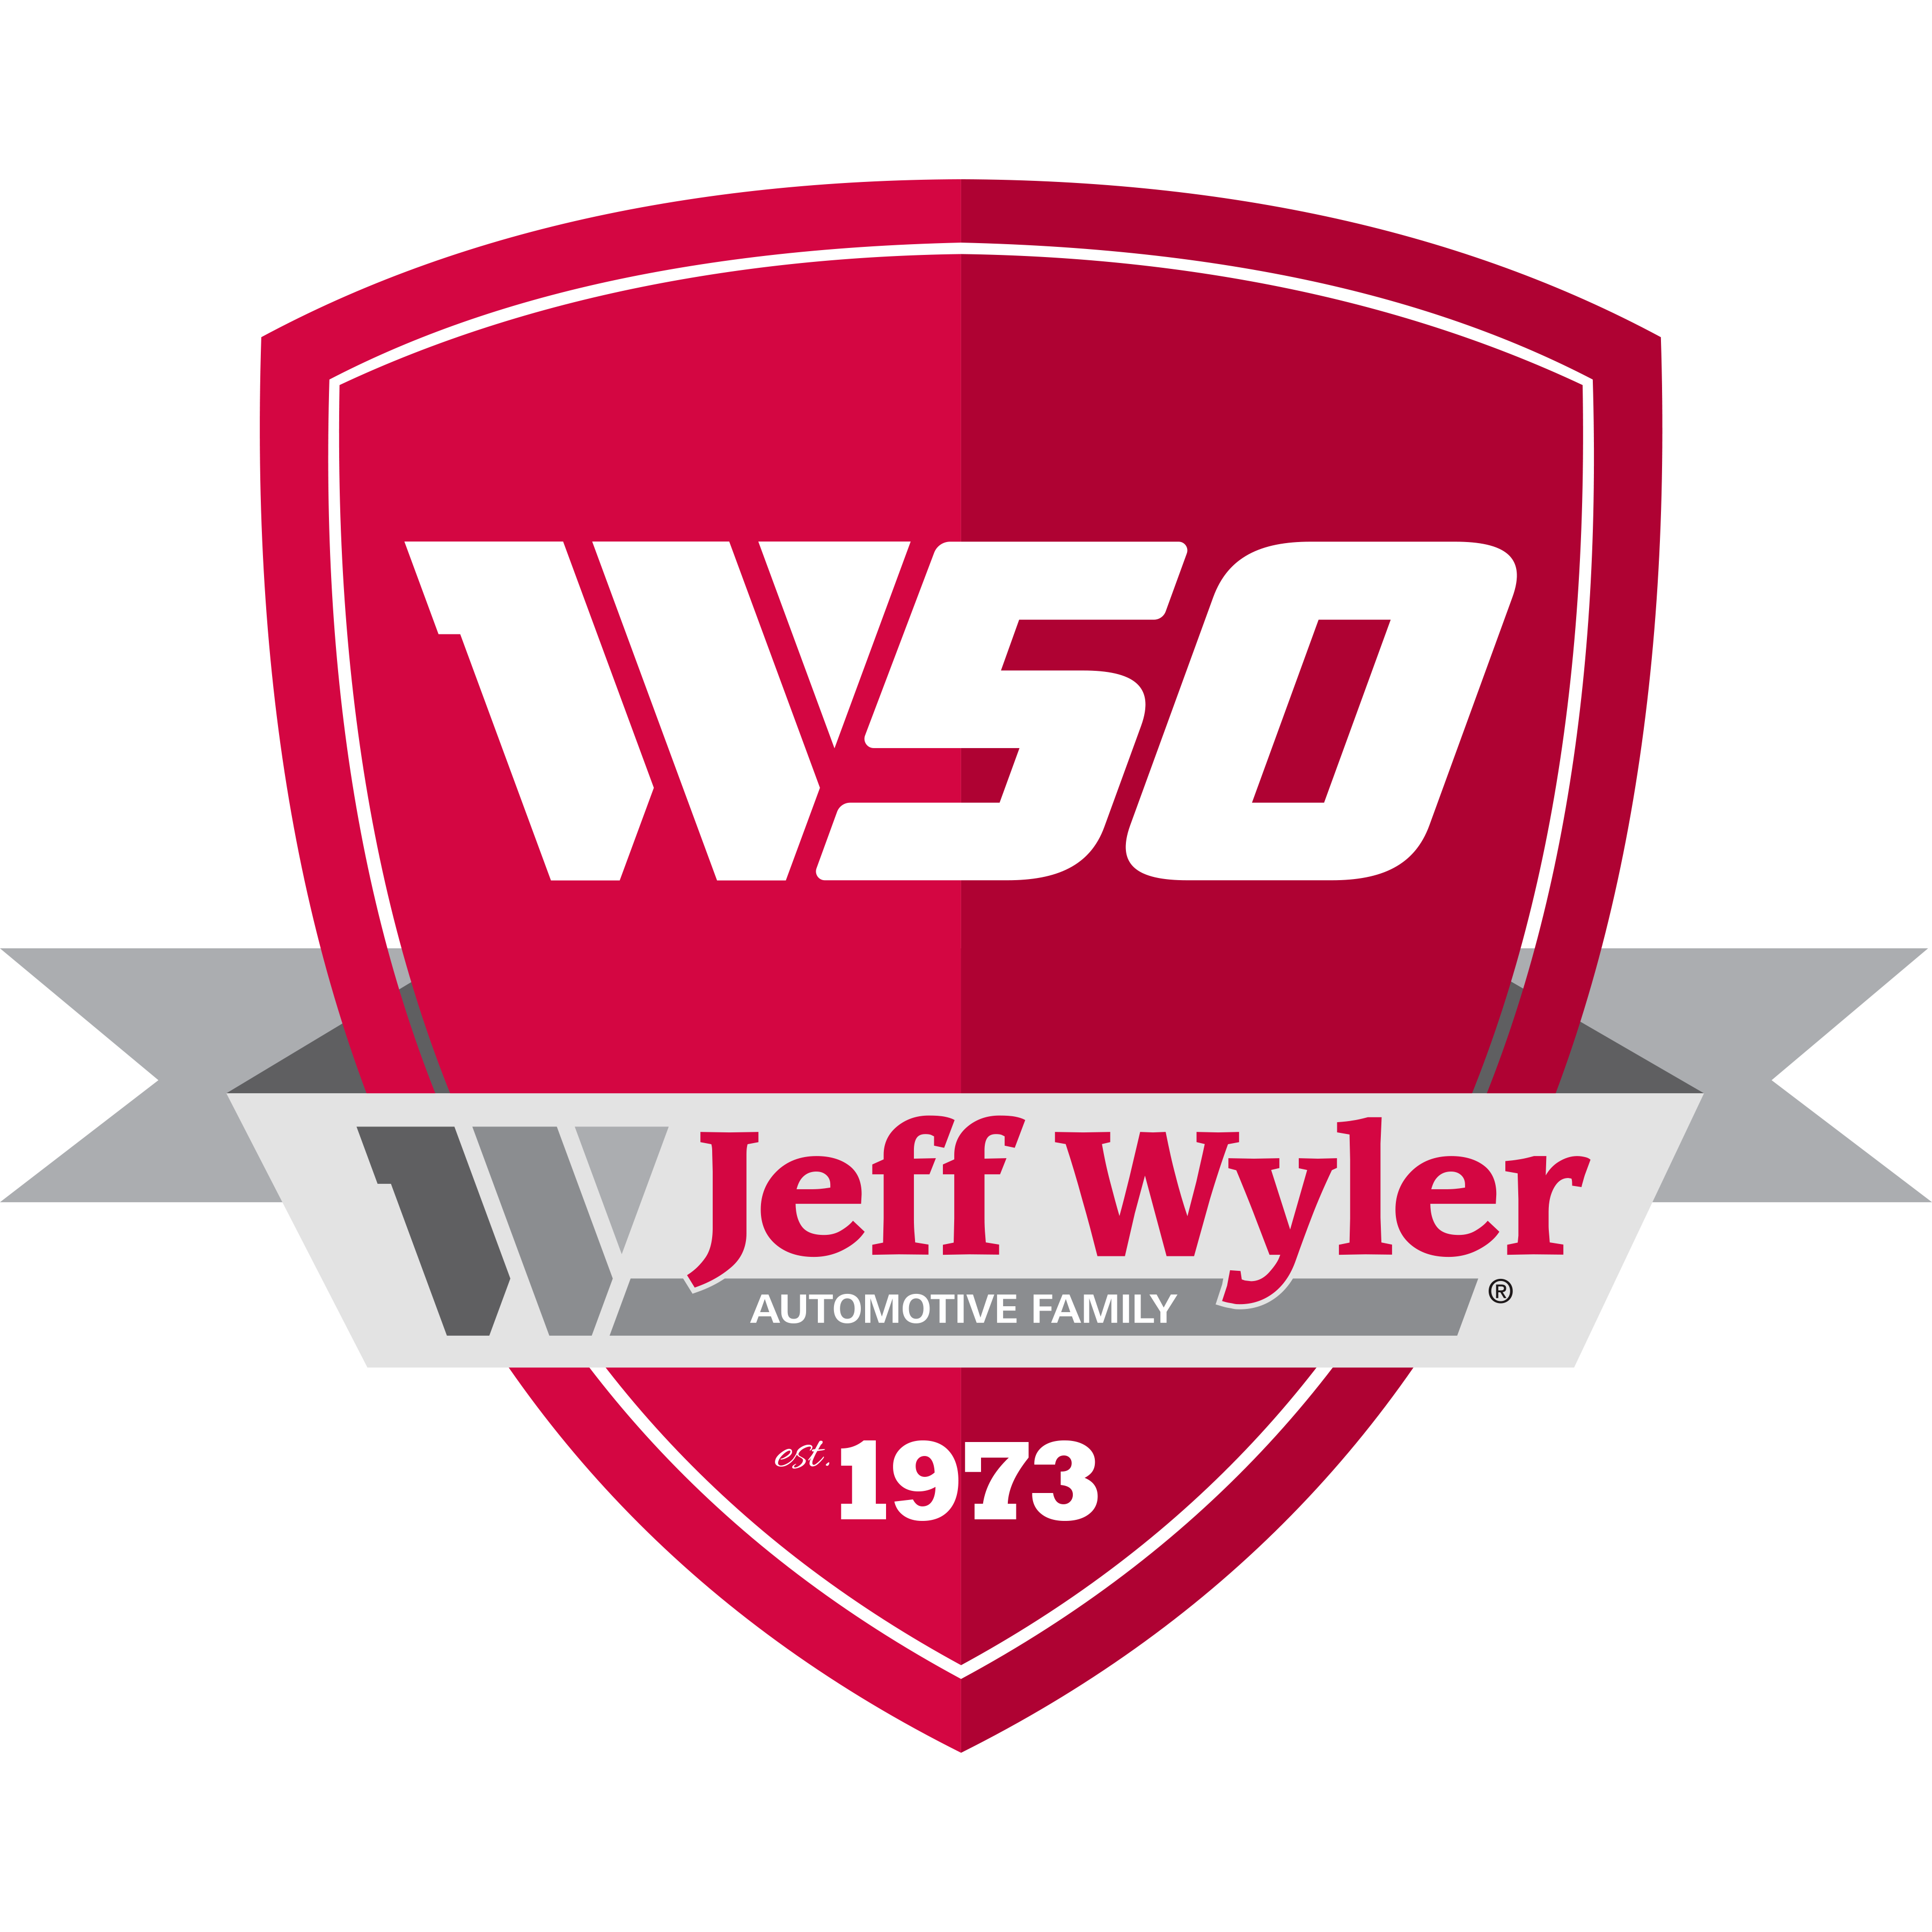 Jeff Wyler Chrysler Jeep Dodge RAM of Ft Thomas Service - Fort Thomas, KY 41075 - (859)815-7740 | ShowMeLocal.com